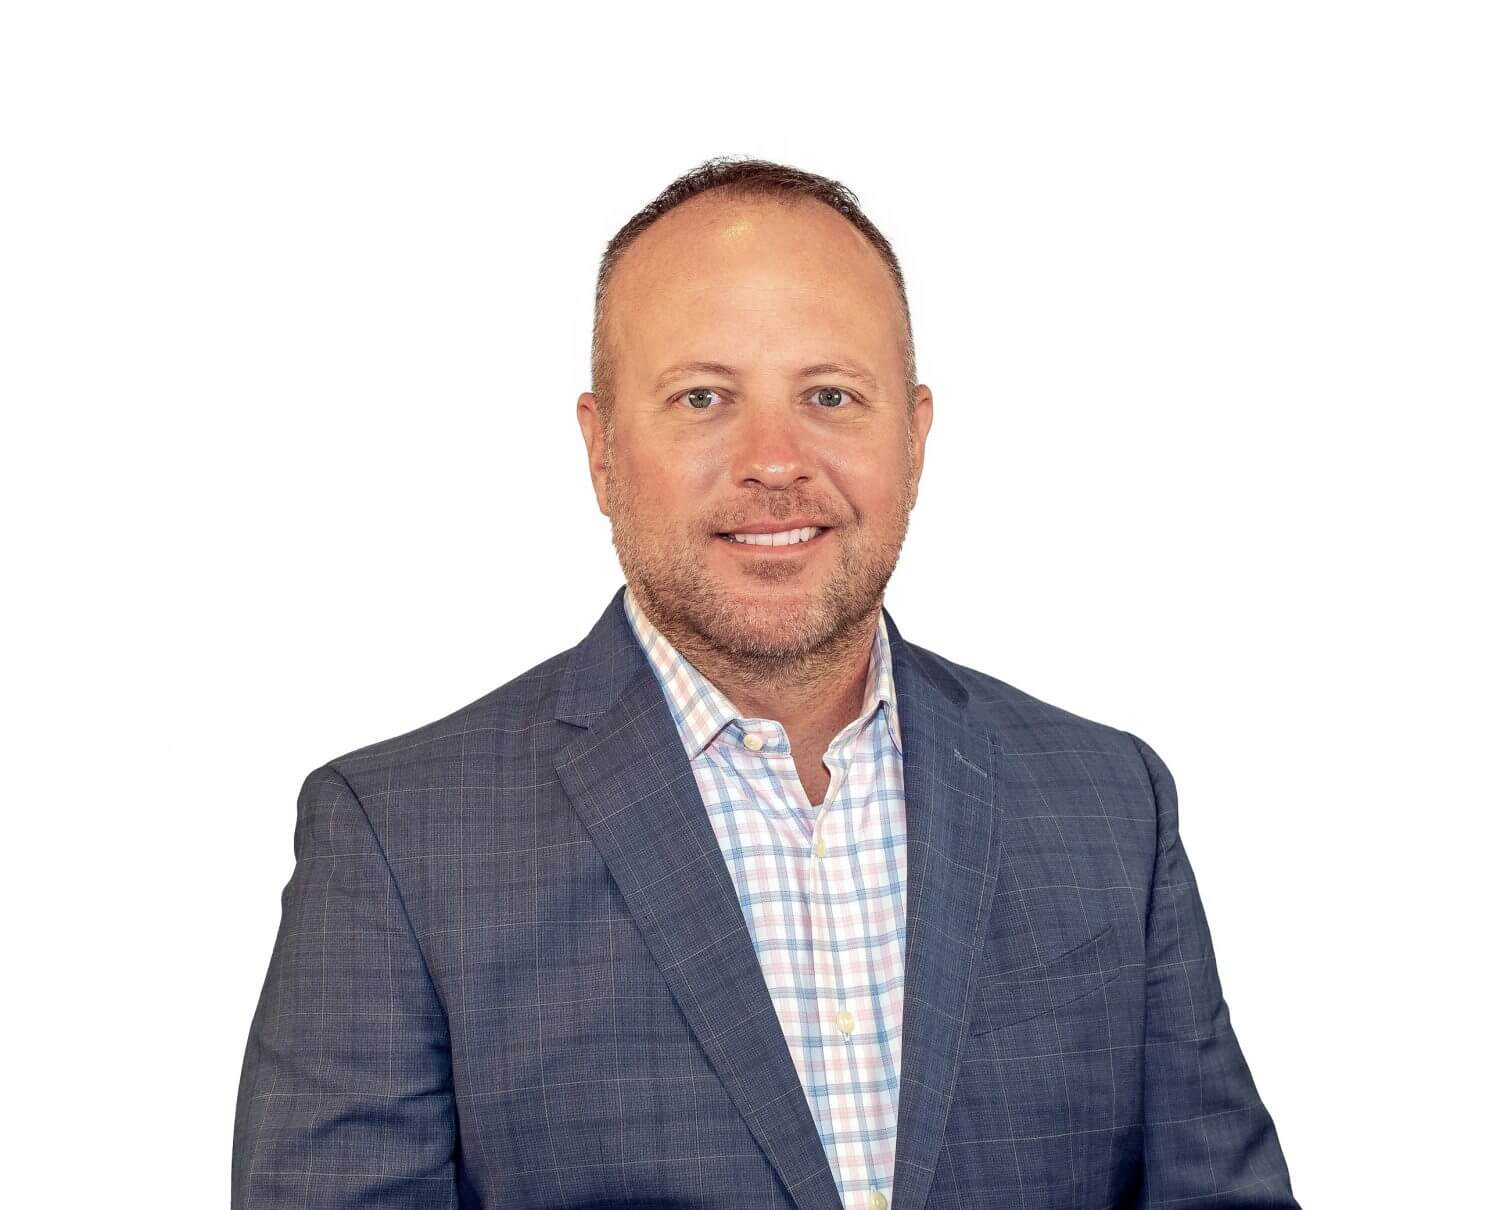 Chad Bushman Joins DLN’s National Board of Directors